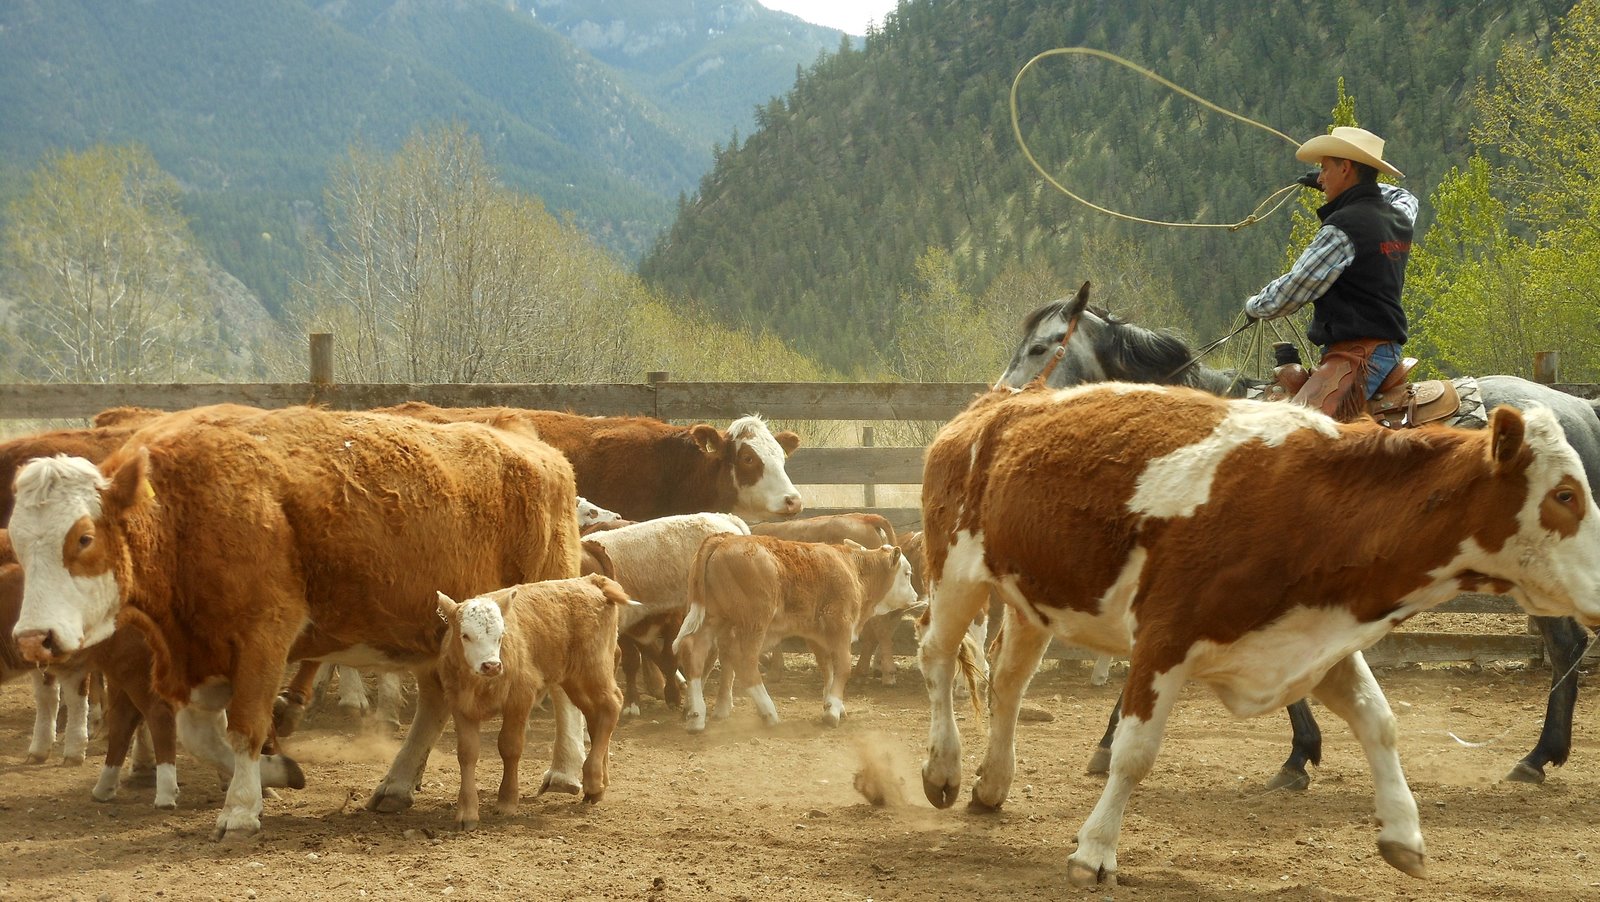 Lillooet - Roundup At The Diamond-S Ranch (This calf is sticking close to her mom!)